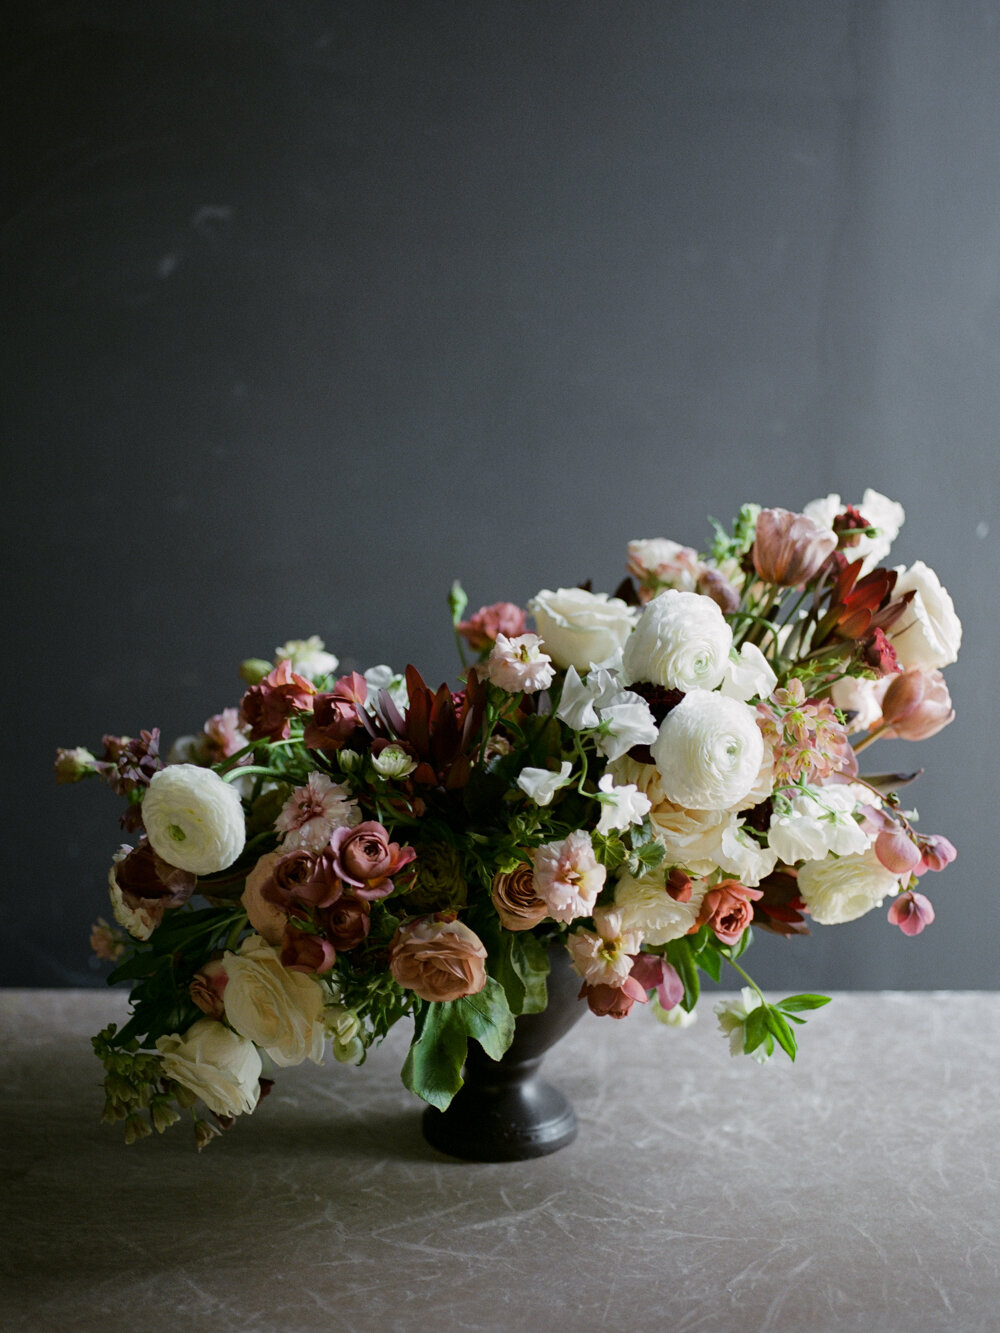   Ode to Joy Flowers  |  Water to Wine Events  